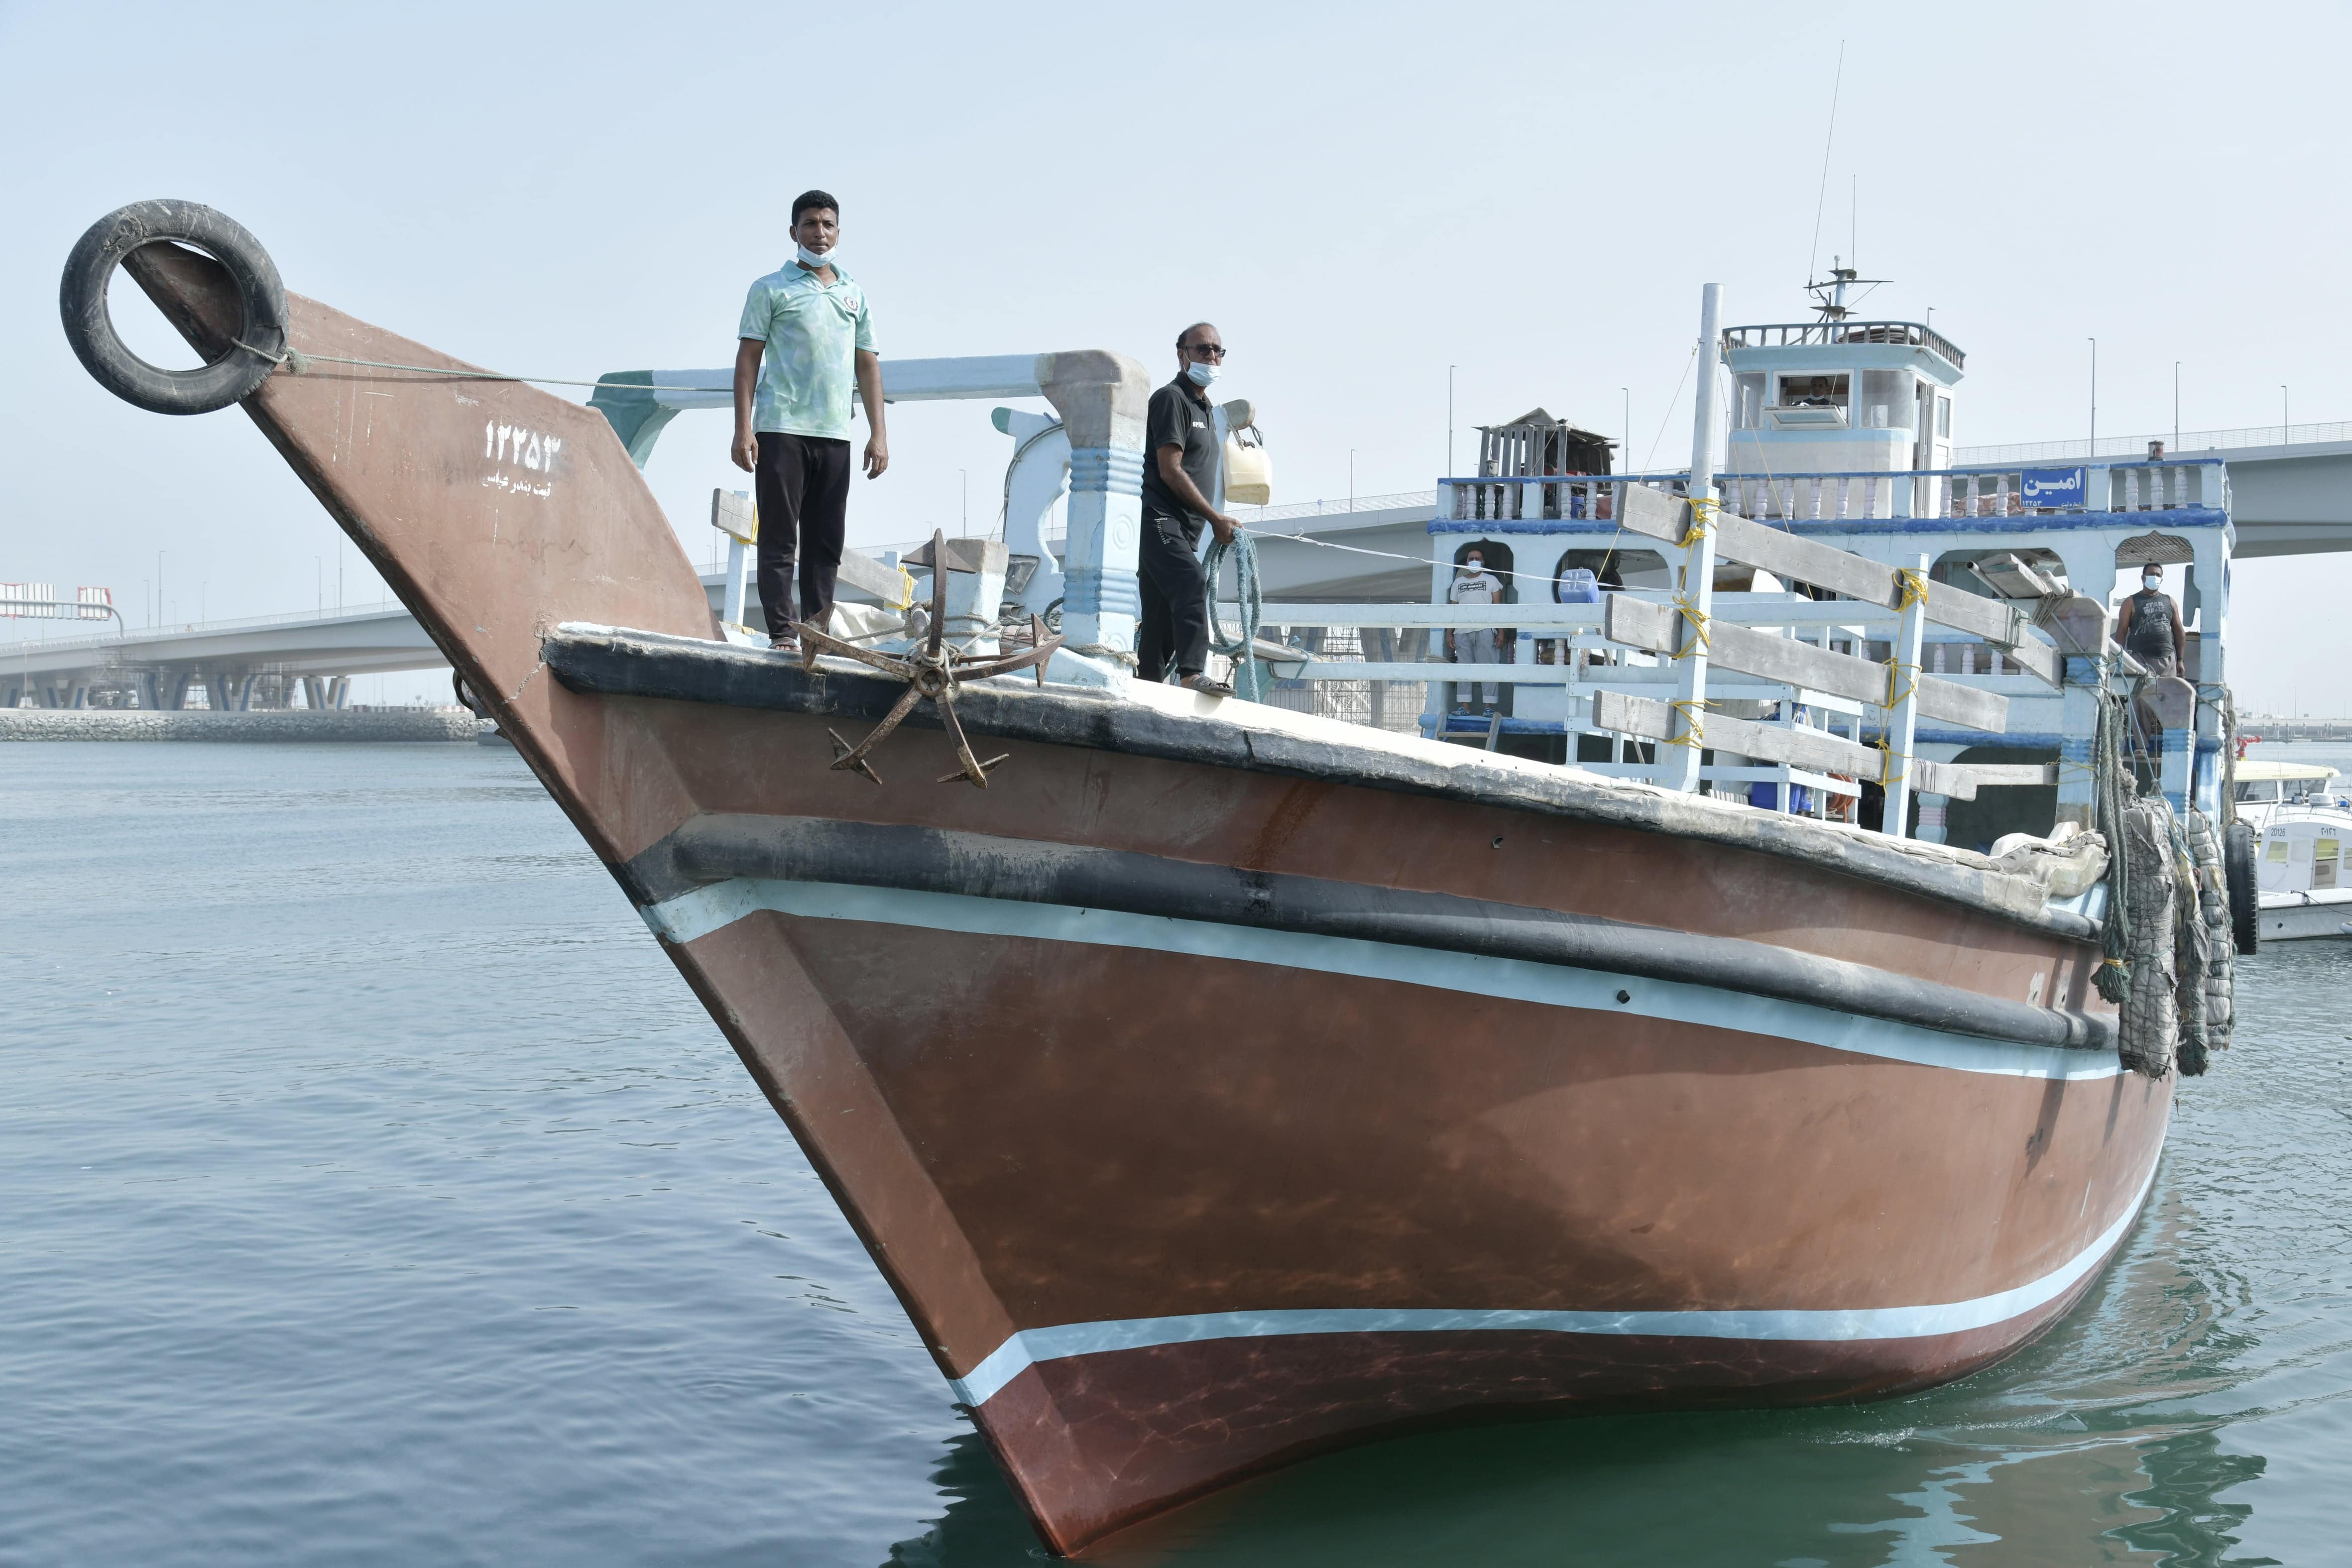 Dubai sees increased trade through more than 2500 commercial wooden dhows in the first quarter of 2022